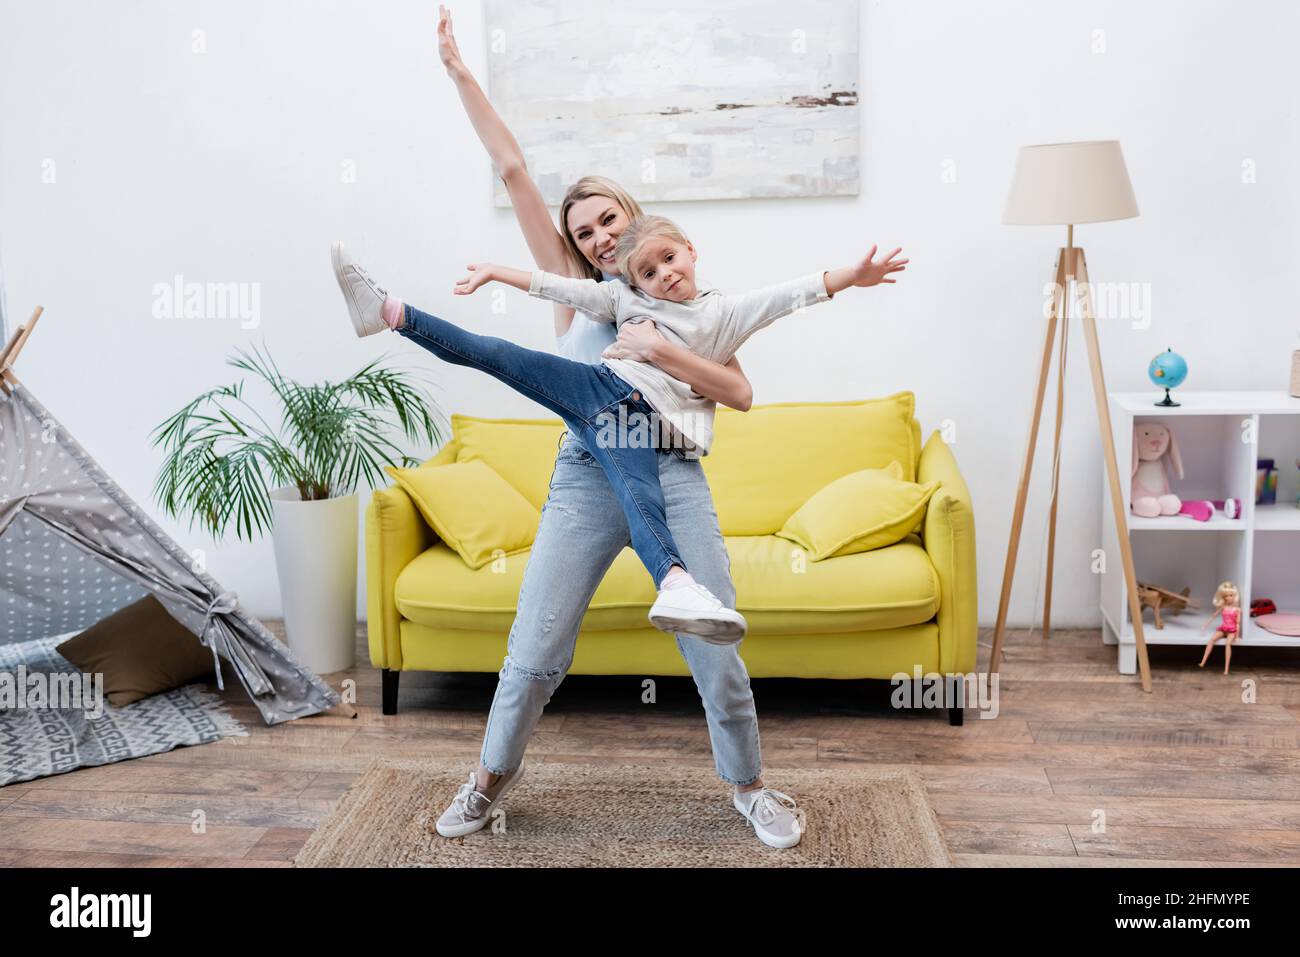 Happy woman holding child near couch and teepee at home Stock Photo